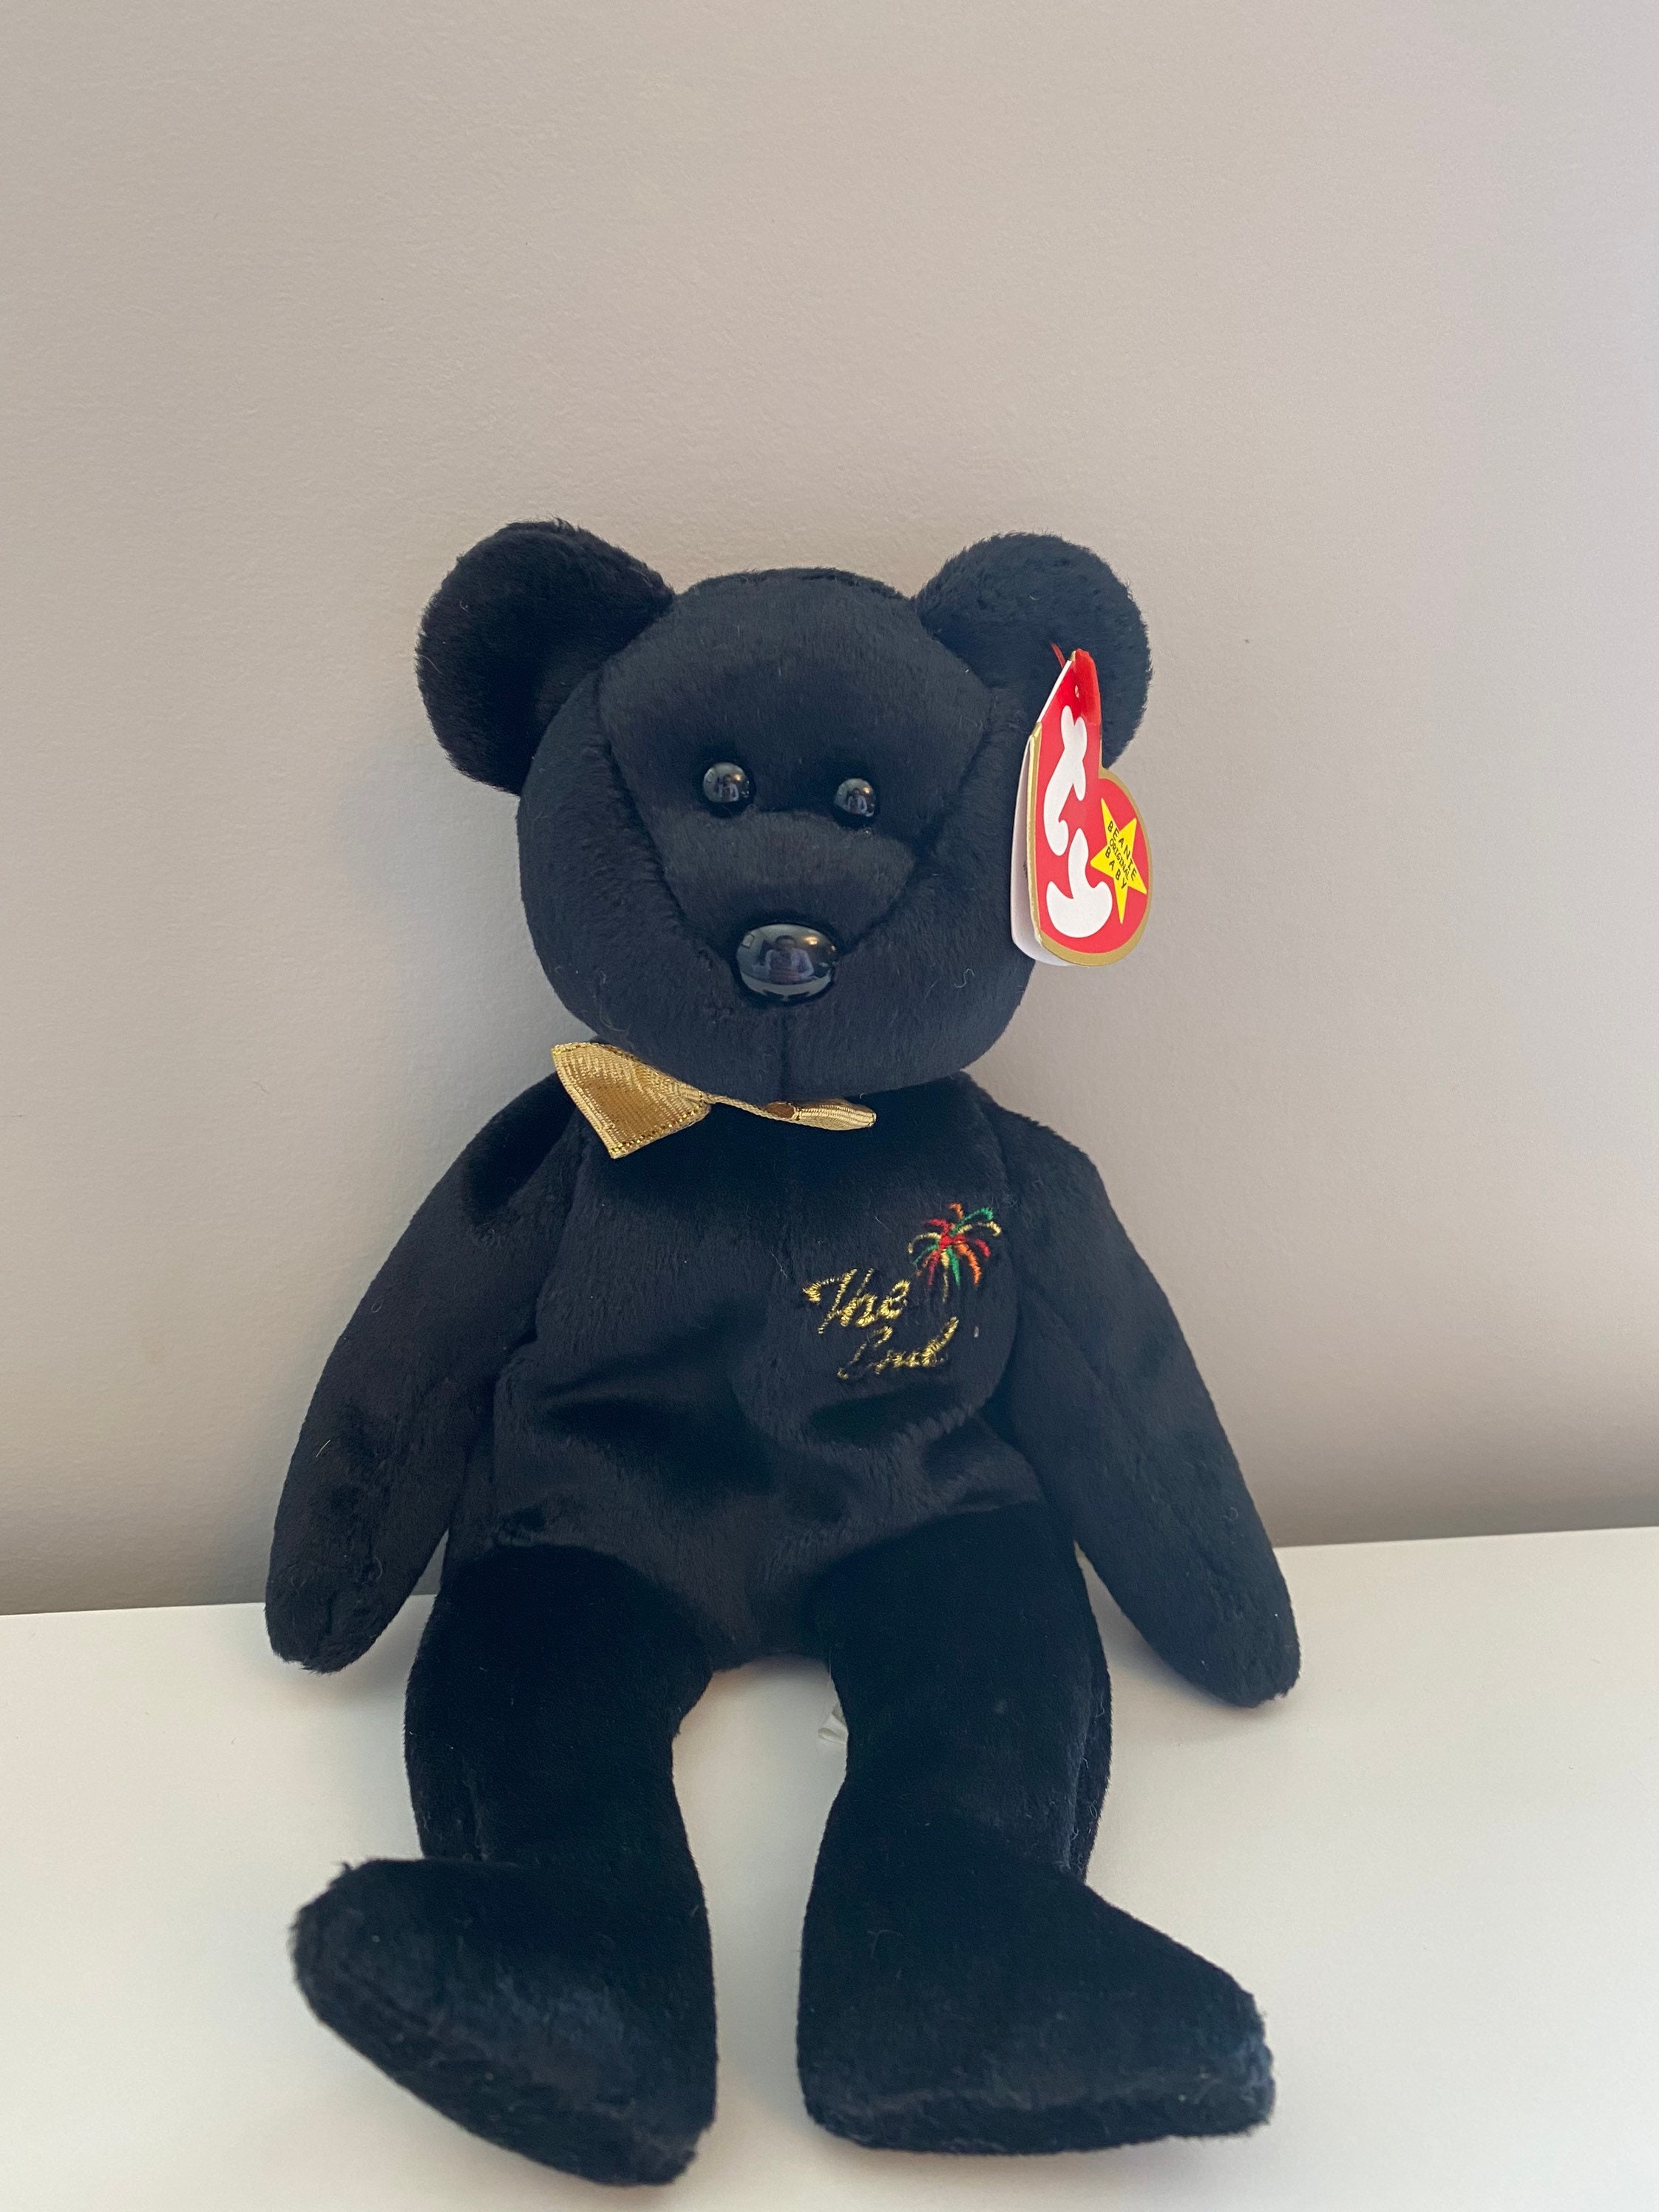 TY Beanie Baby Bear The End 8.5 inch Etsy